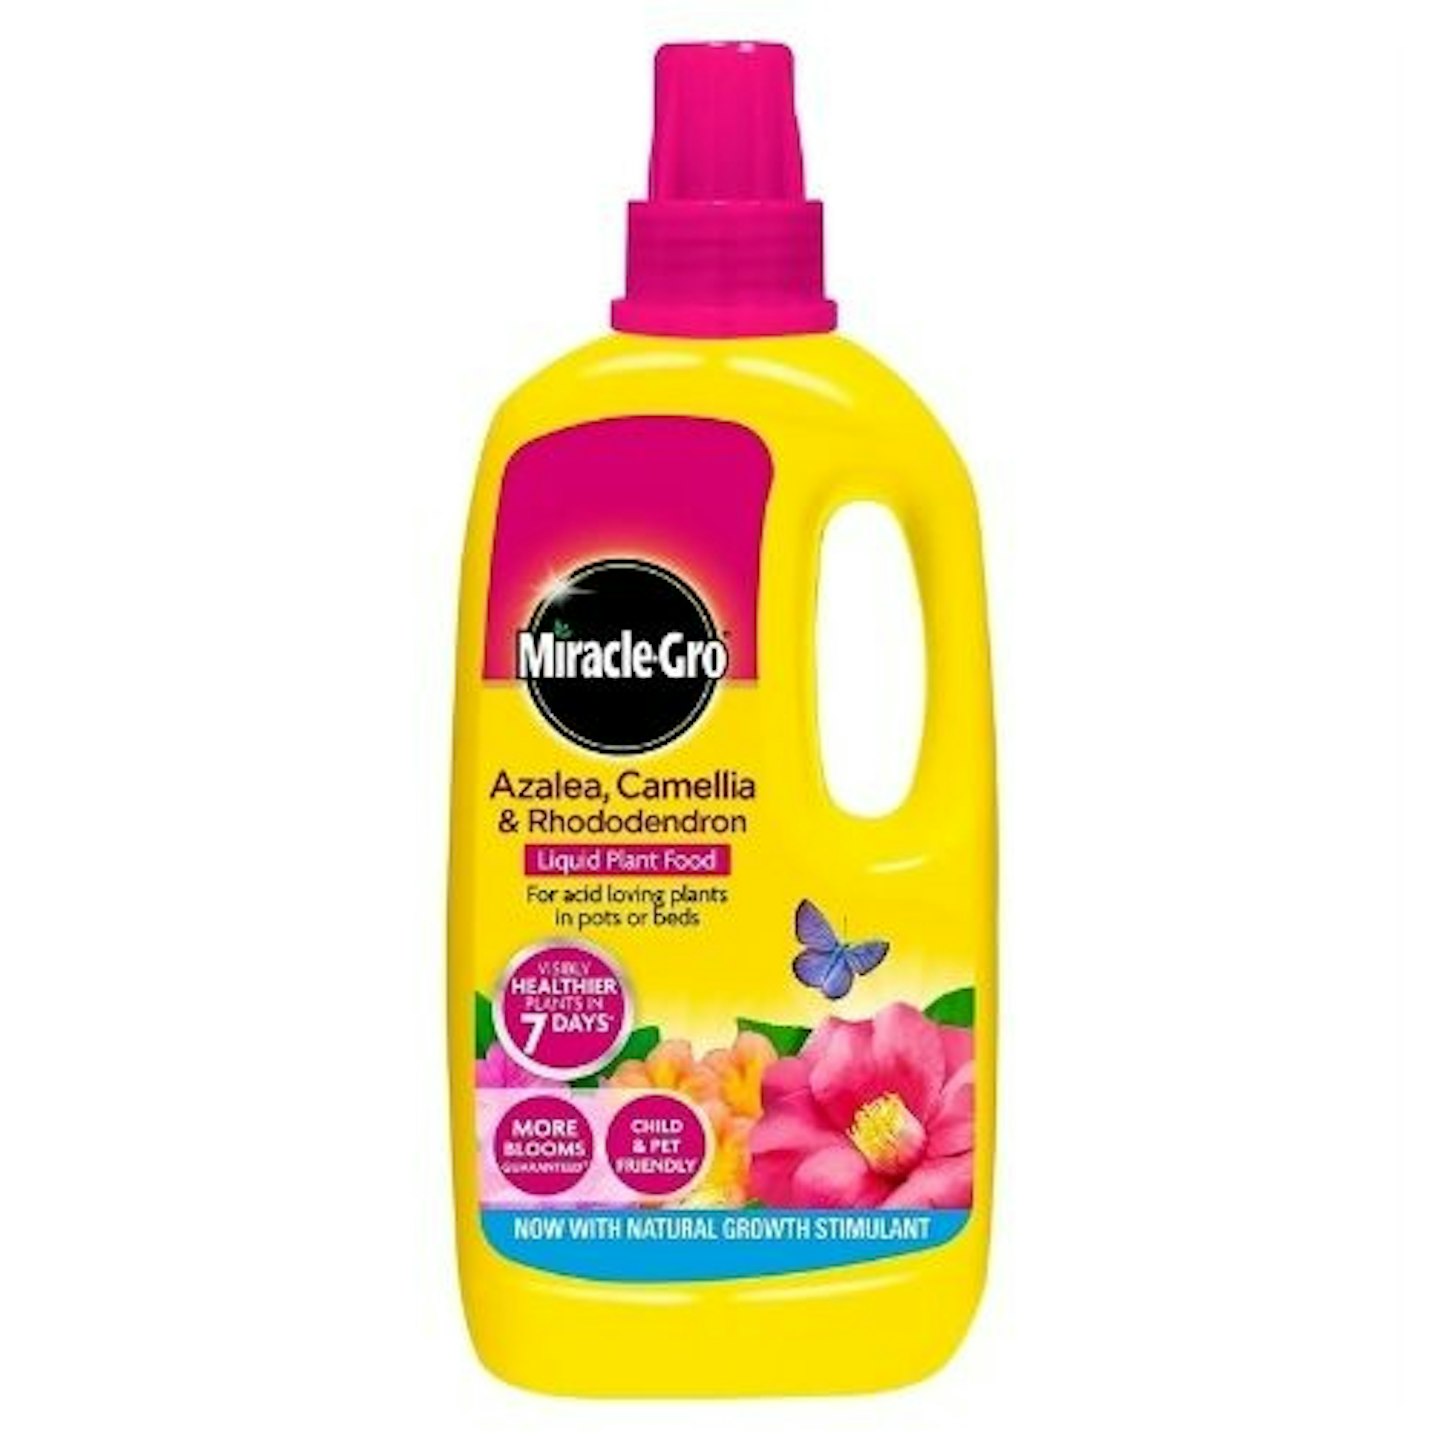 Miracle-Gro Azalea, Camellia & Rhododendron Concentrated Liquid Plant Food - 1L